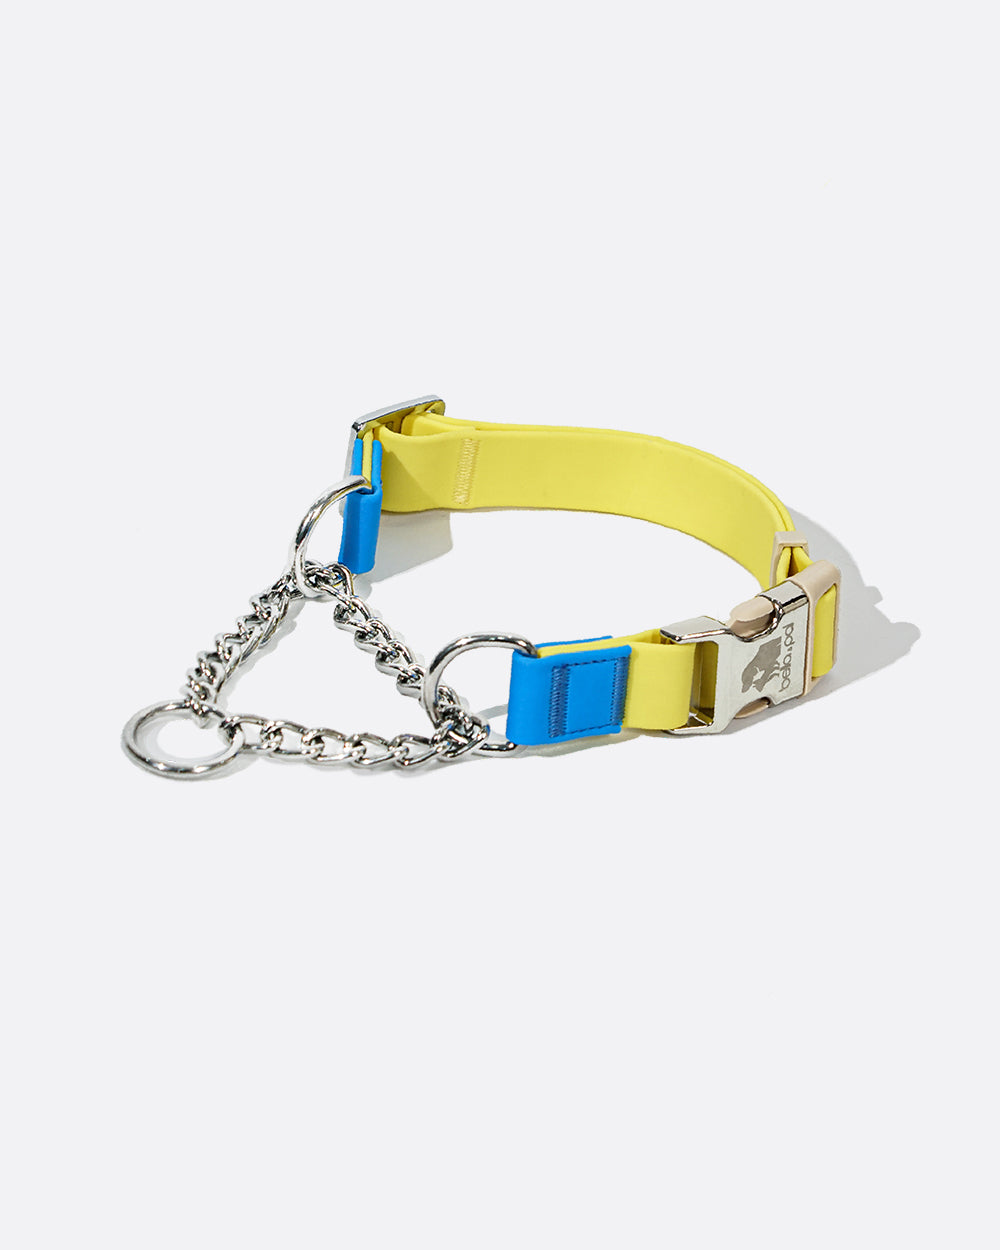 Mini Yellow Aqua PVC Waterproof Martingale Collar for dogs, showcasing its vibrant yellow color and durable waterproof material